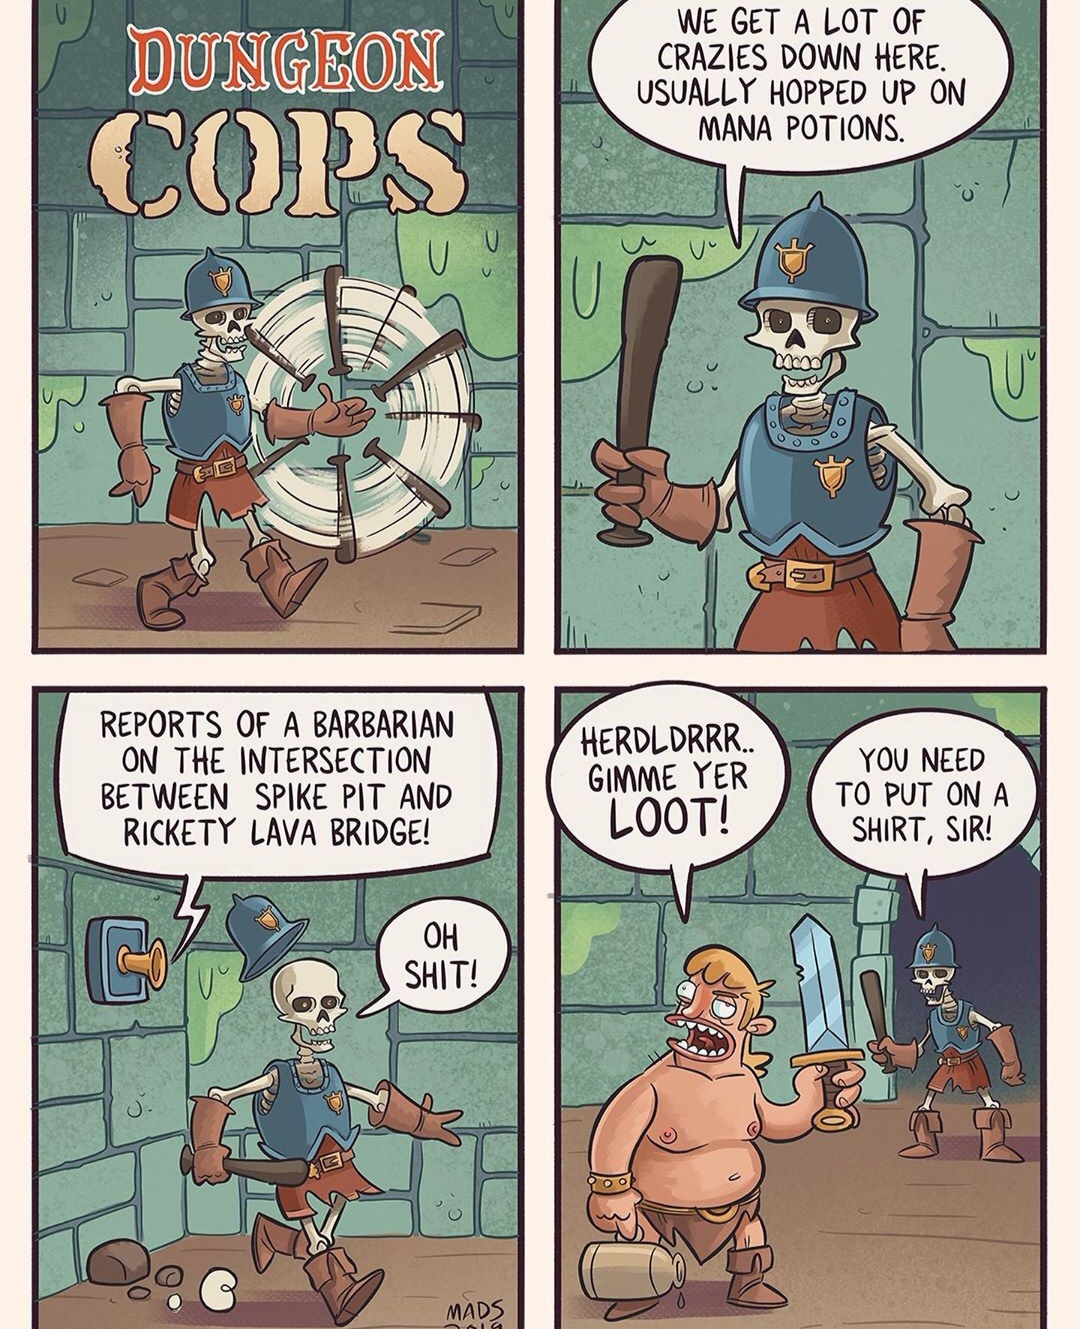 dungeons and dragons memes - Dungeon Cops We Get A Lot Of Crazies Down Here. Usually Hopped Up On Mana Potions Reports Of A Barbarian On The Intersection Between Spike Pit And Rickety Lava Bridge! Gimme Yer Loot! You Need To Put On A Shirt, Sir! Oh Shit! 